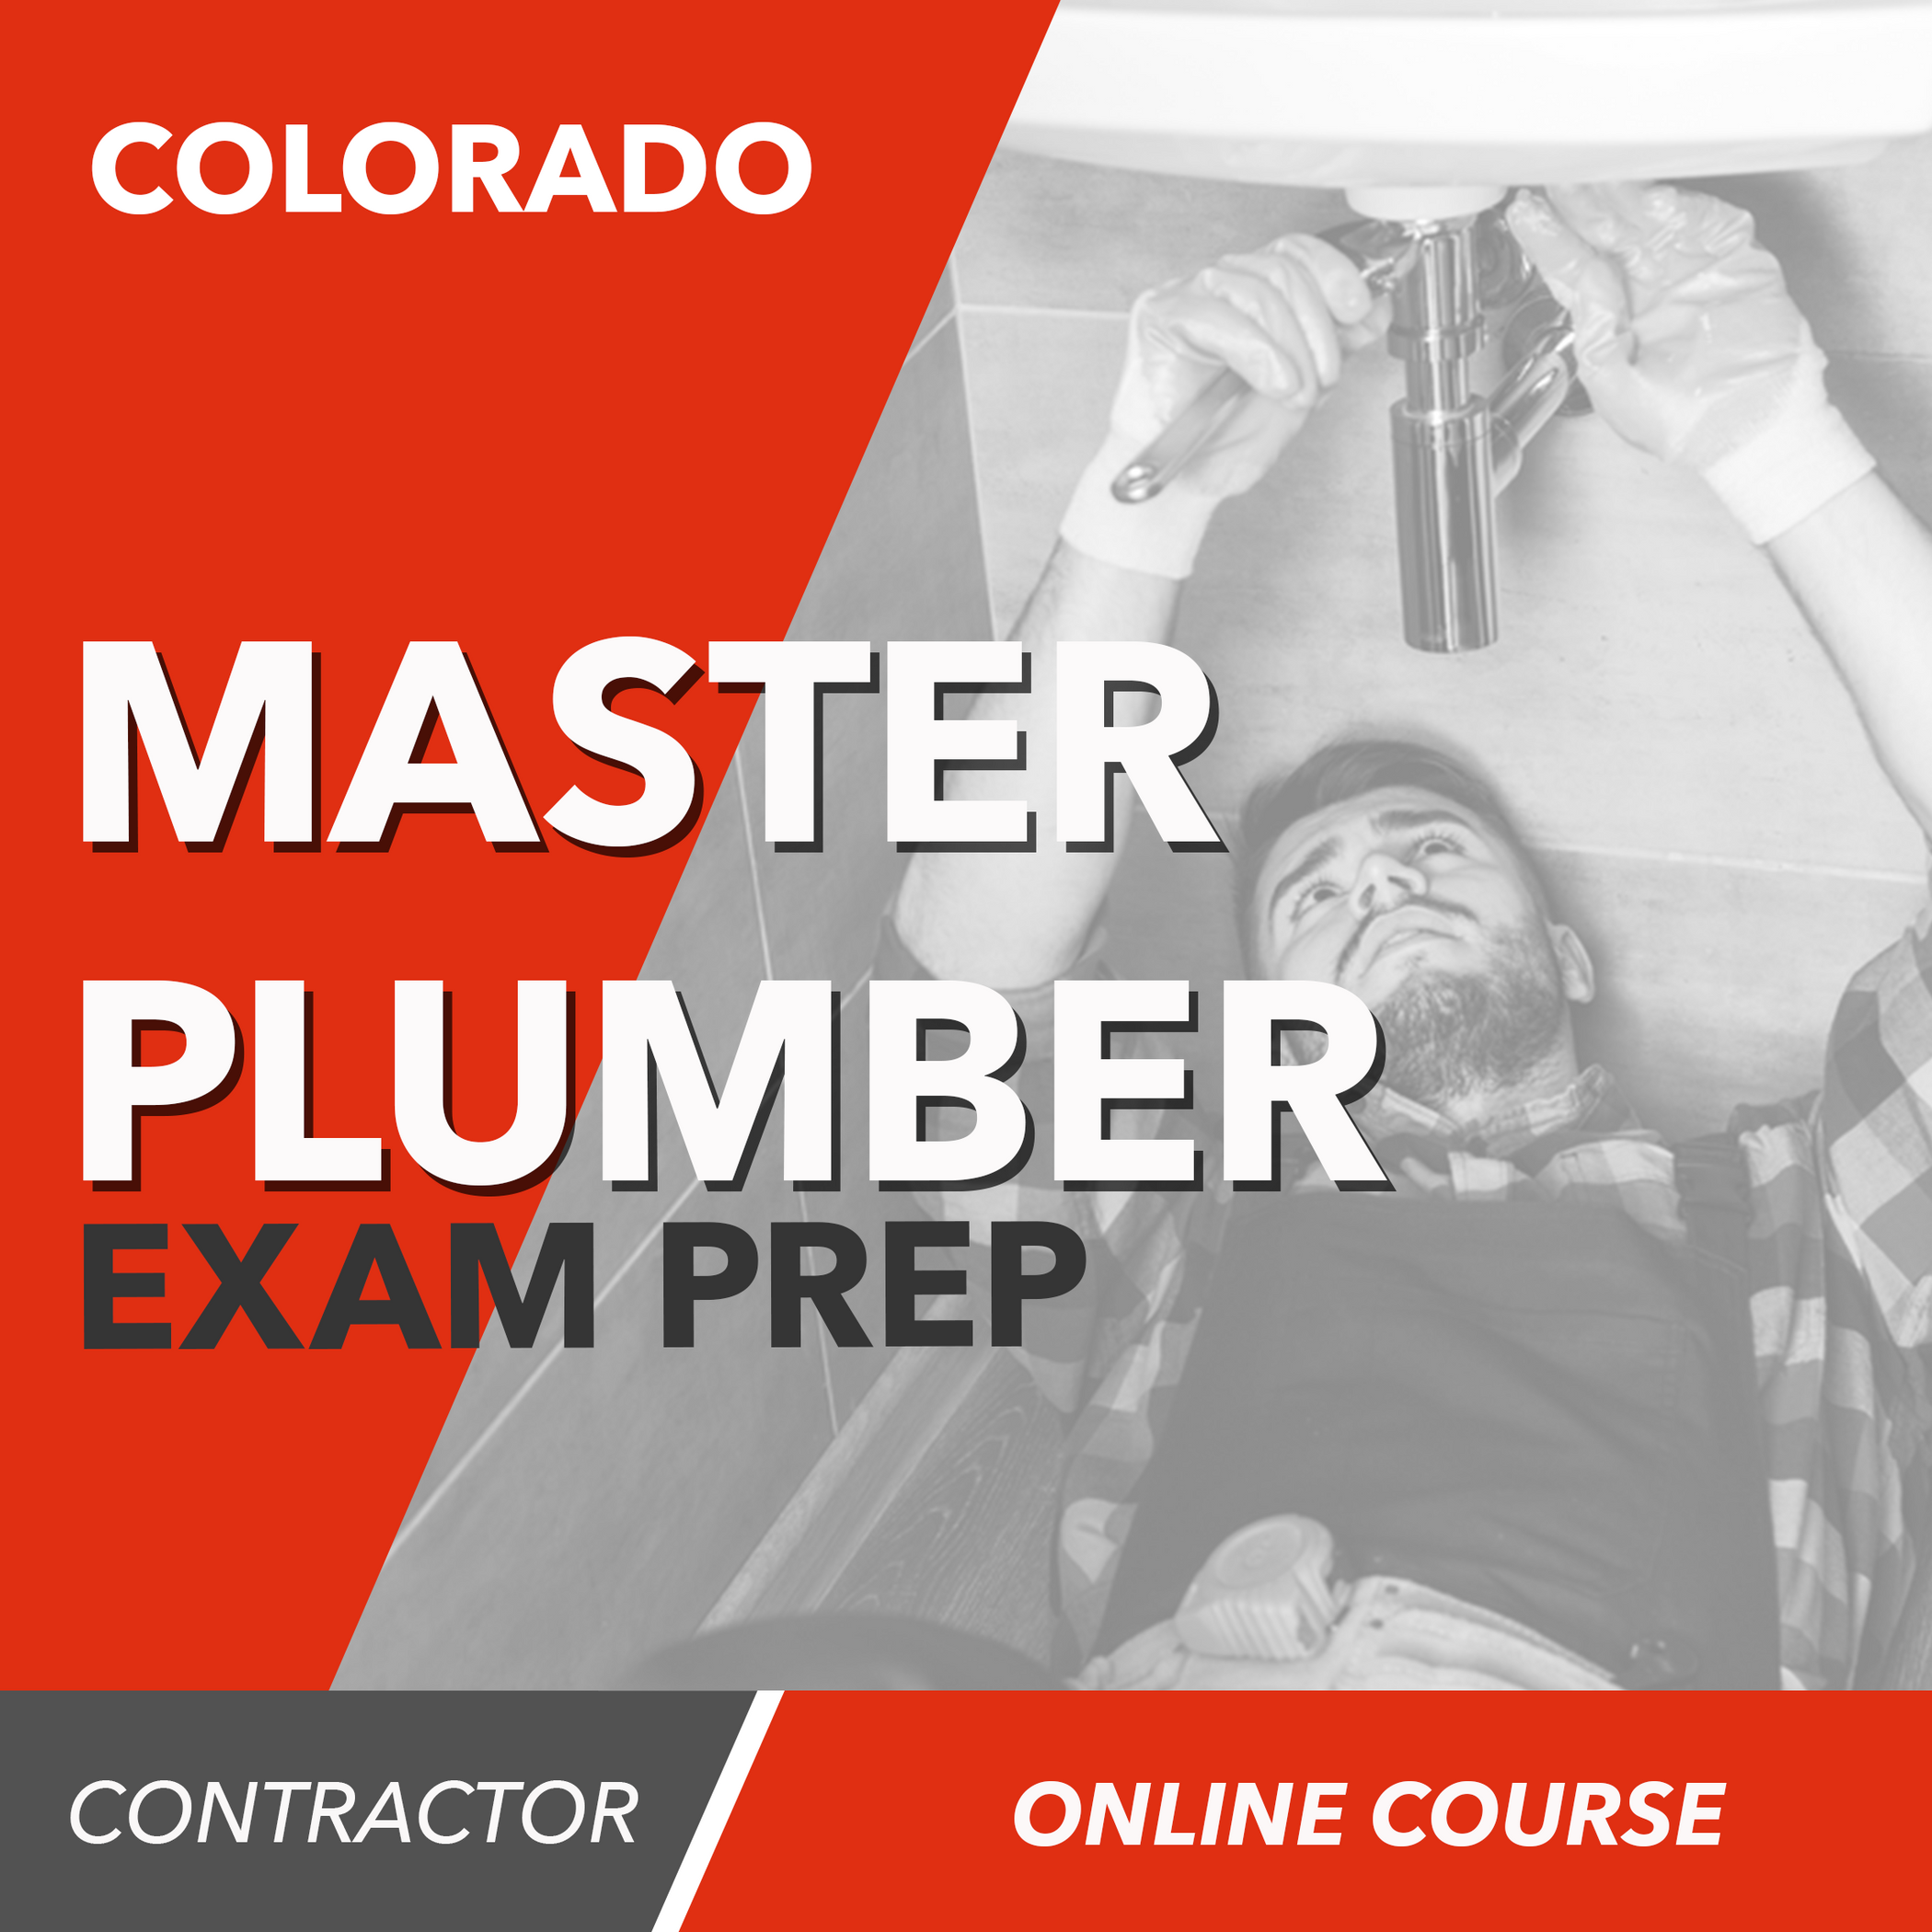 Montana plumber installer license prep class download the new version for mac